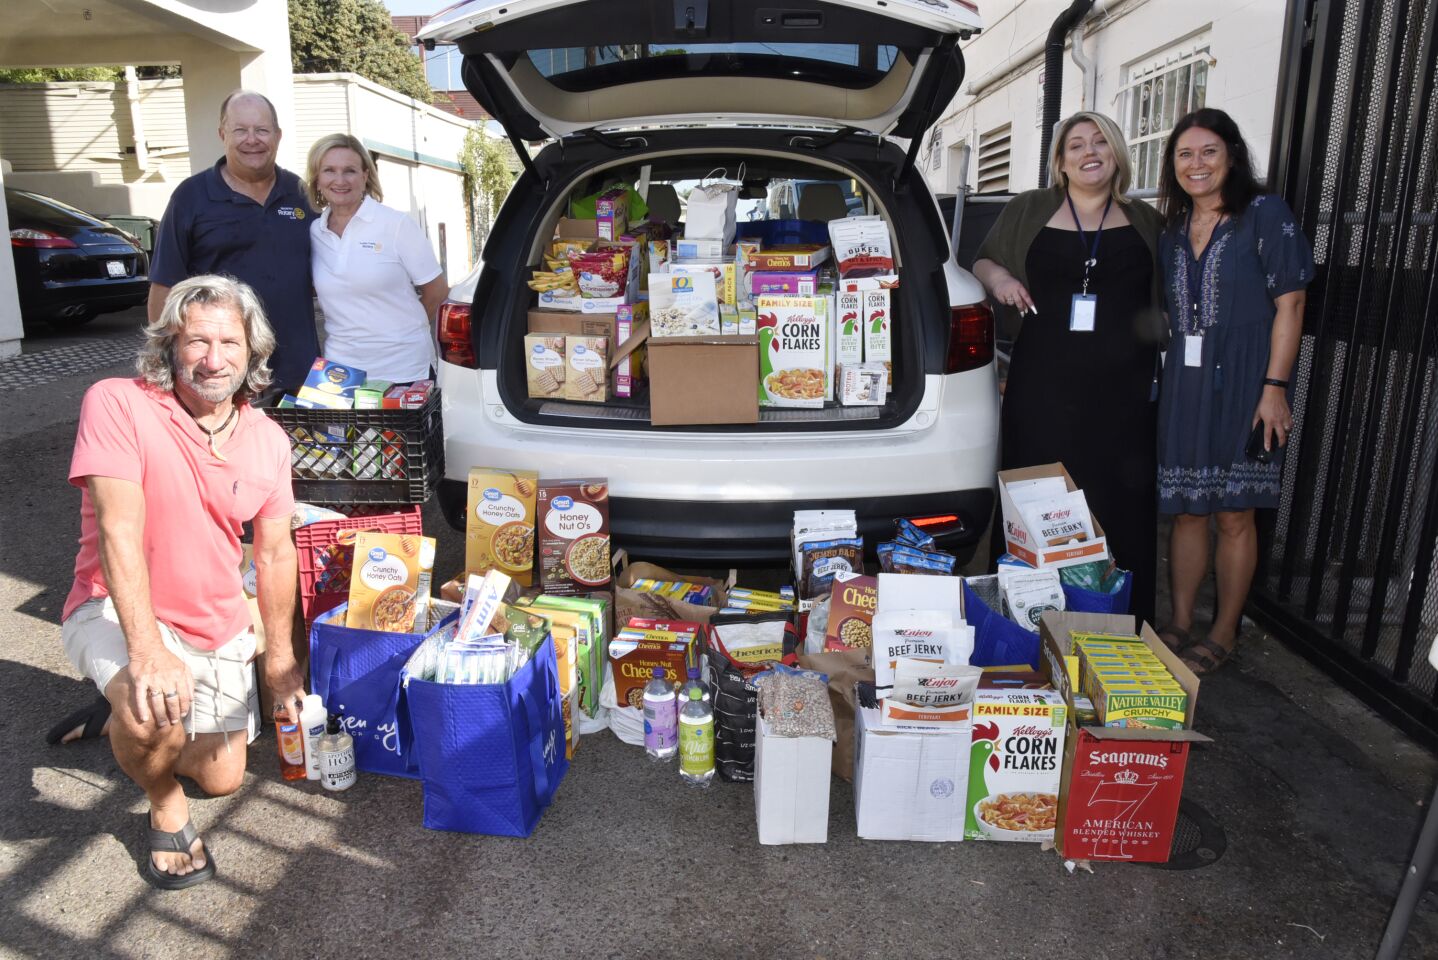 Encinitas Rotary President John Simonelli (kneeling), Encinitas Rotary Community Services Director Mark Berning, Encinitas Coastal Rotary President Vembra Holnagel, CRC Director of Social Services Miranda Chavez, Volunteer Manager Sara Rosenbaum, with the food donations the two Encinitas Rotary groups collected